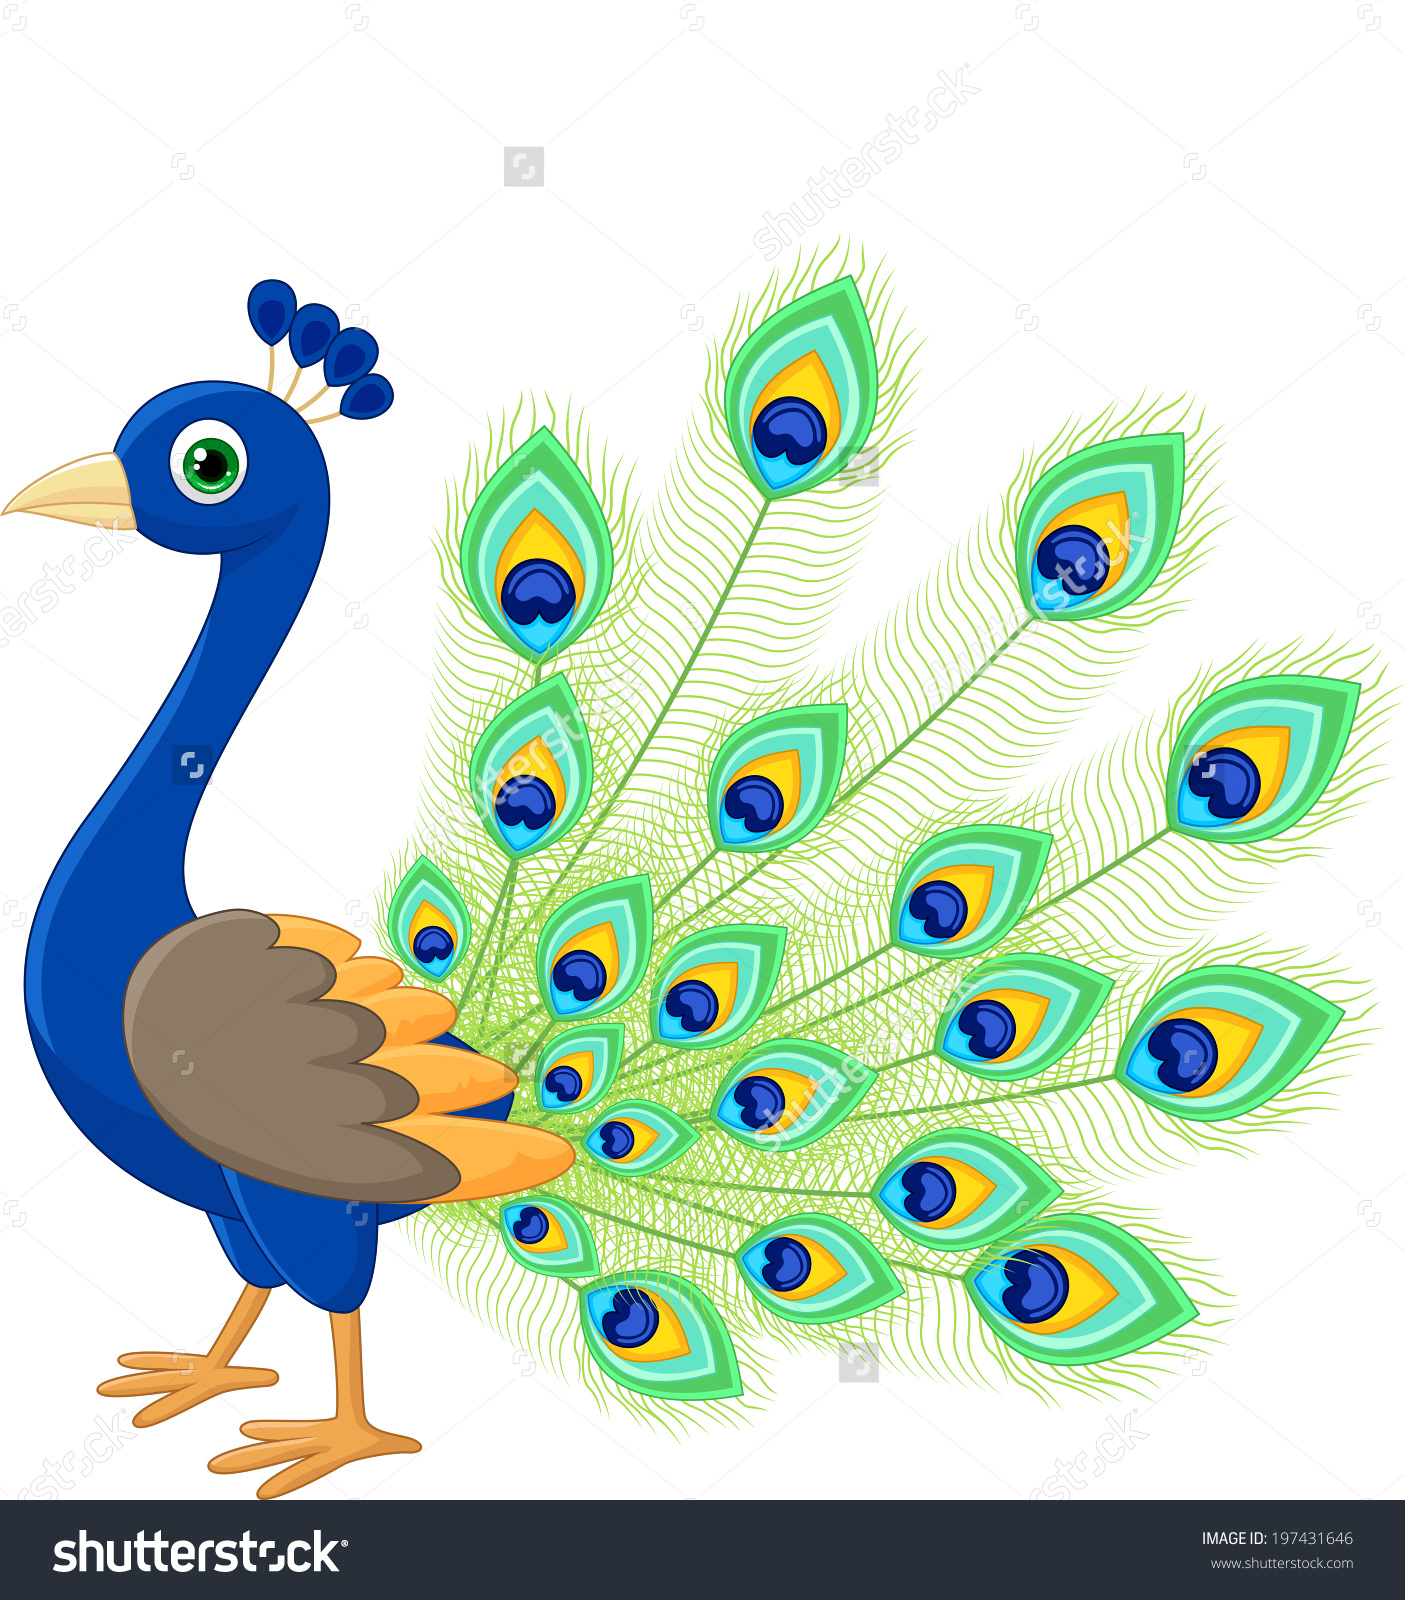 Peacock clipart #13, Download drawings